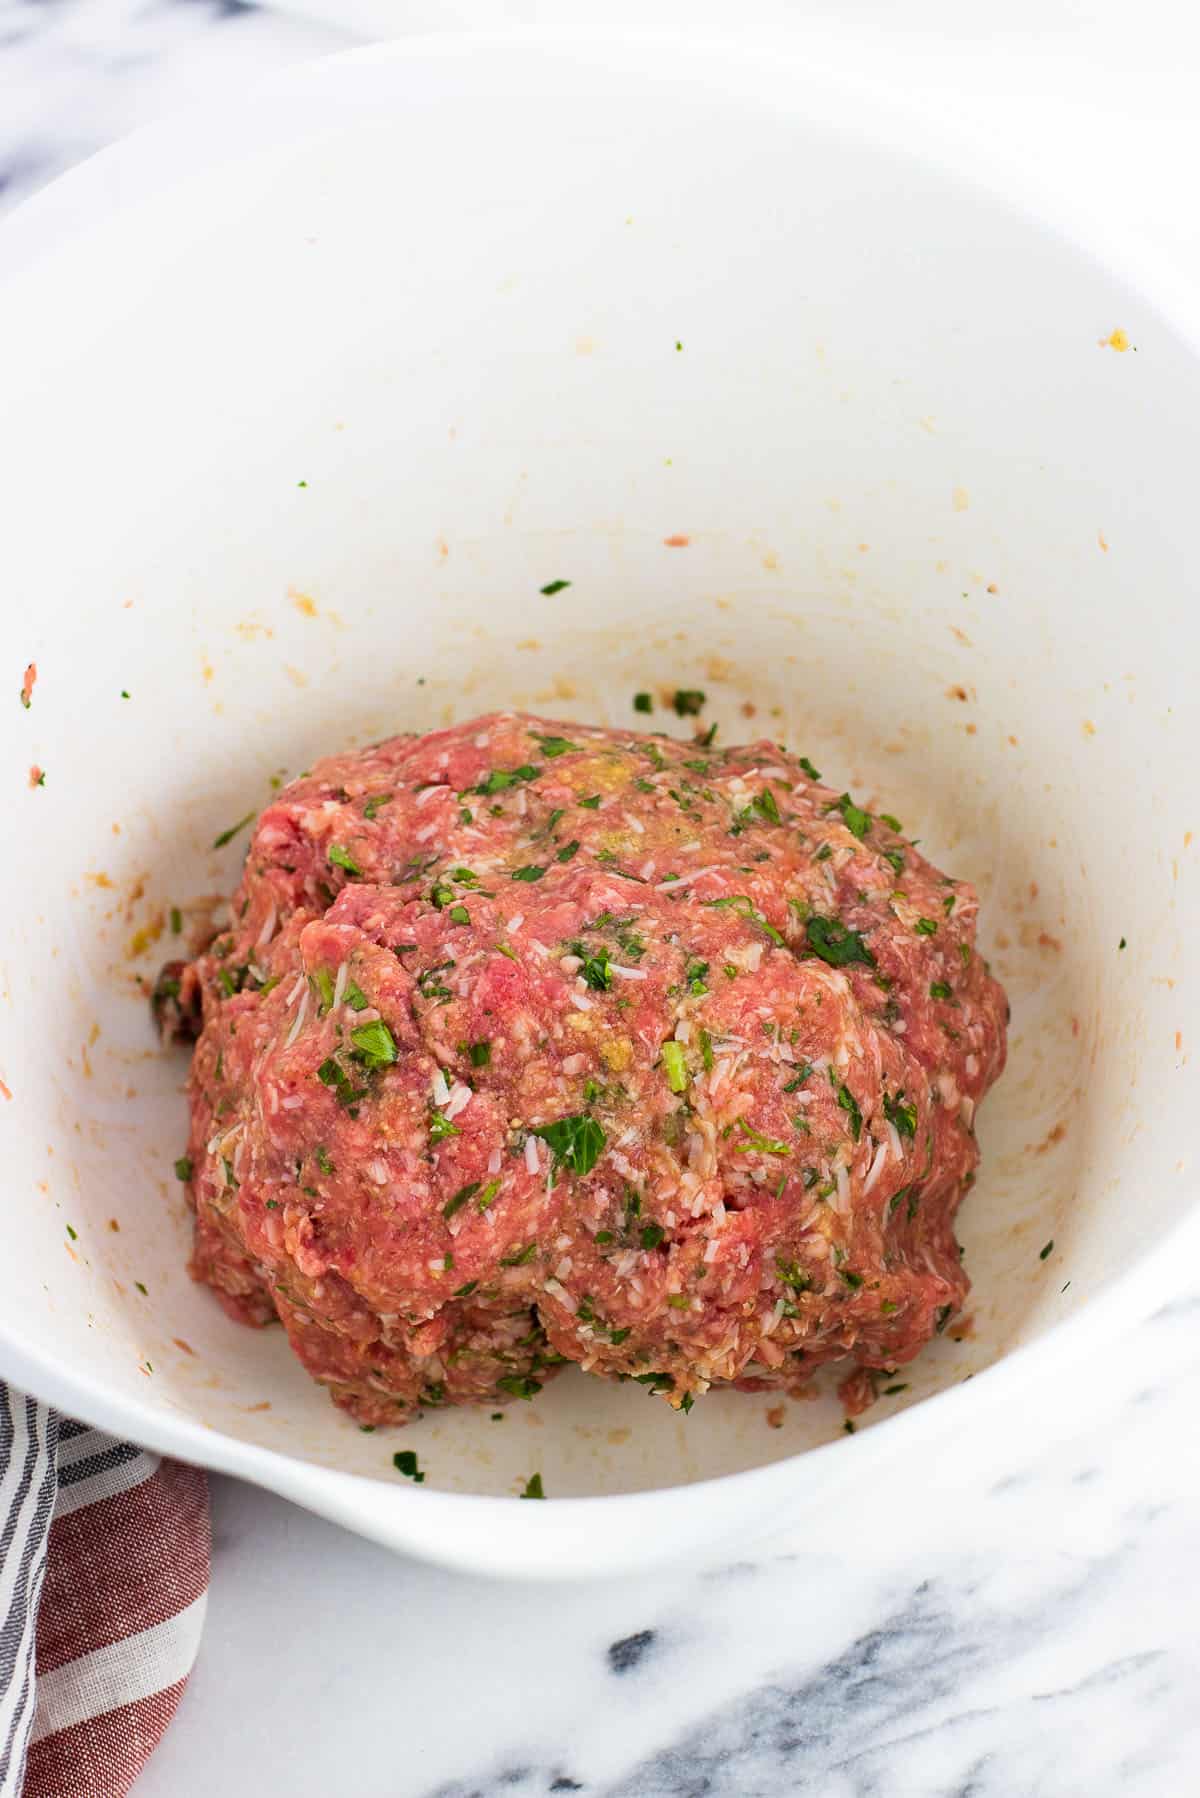 Meatball mixture combined together in a mixing bowl.